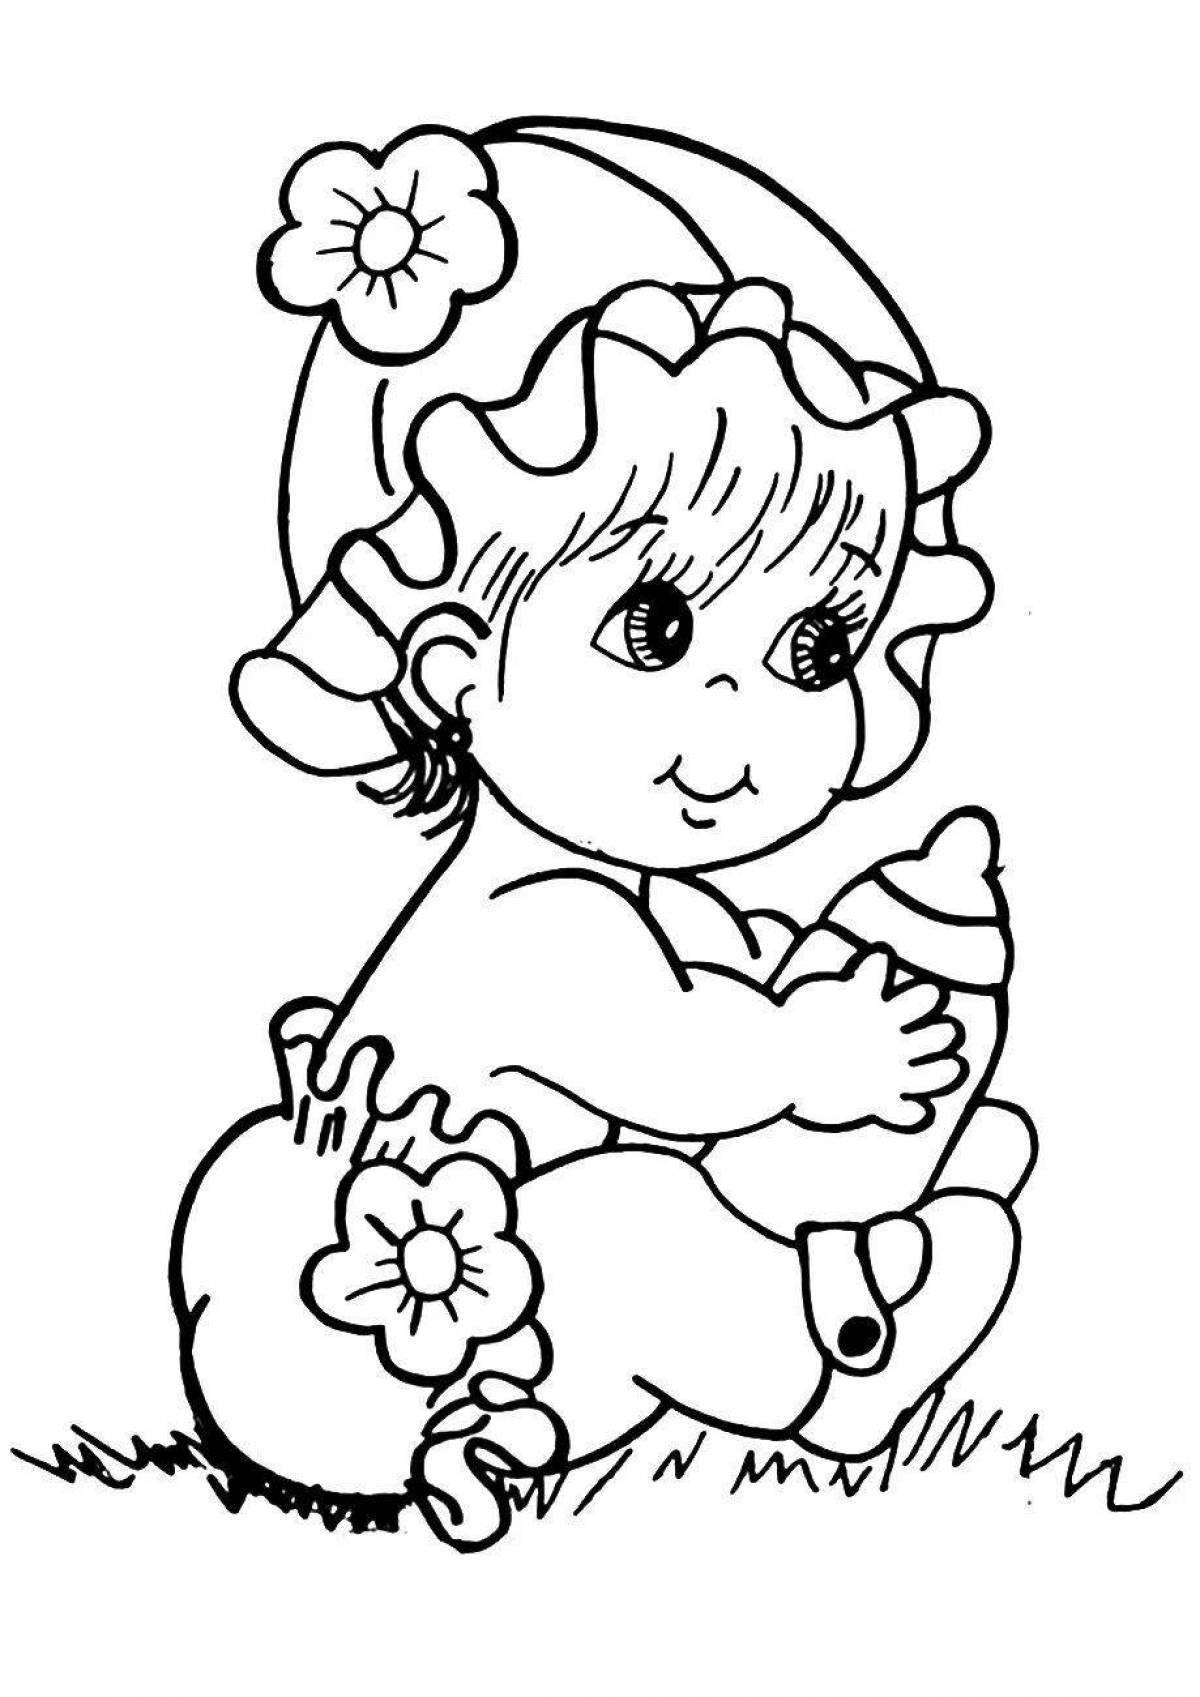 Coloring pages for dolls